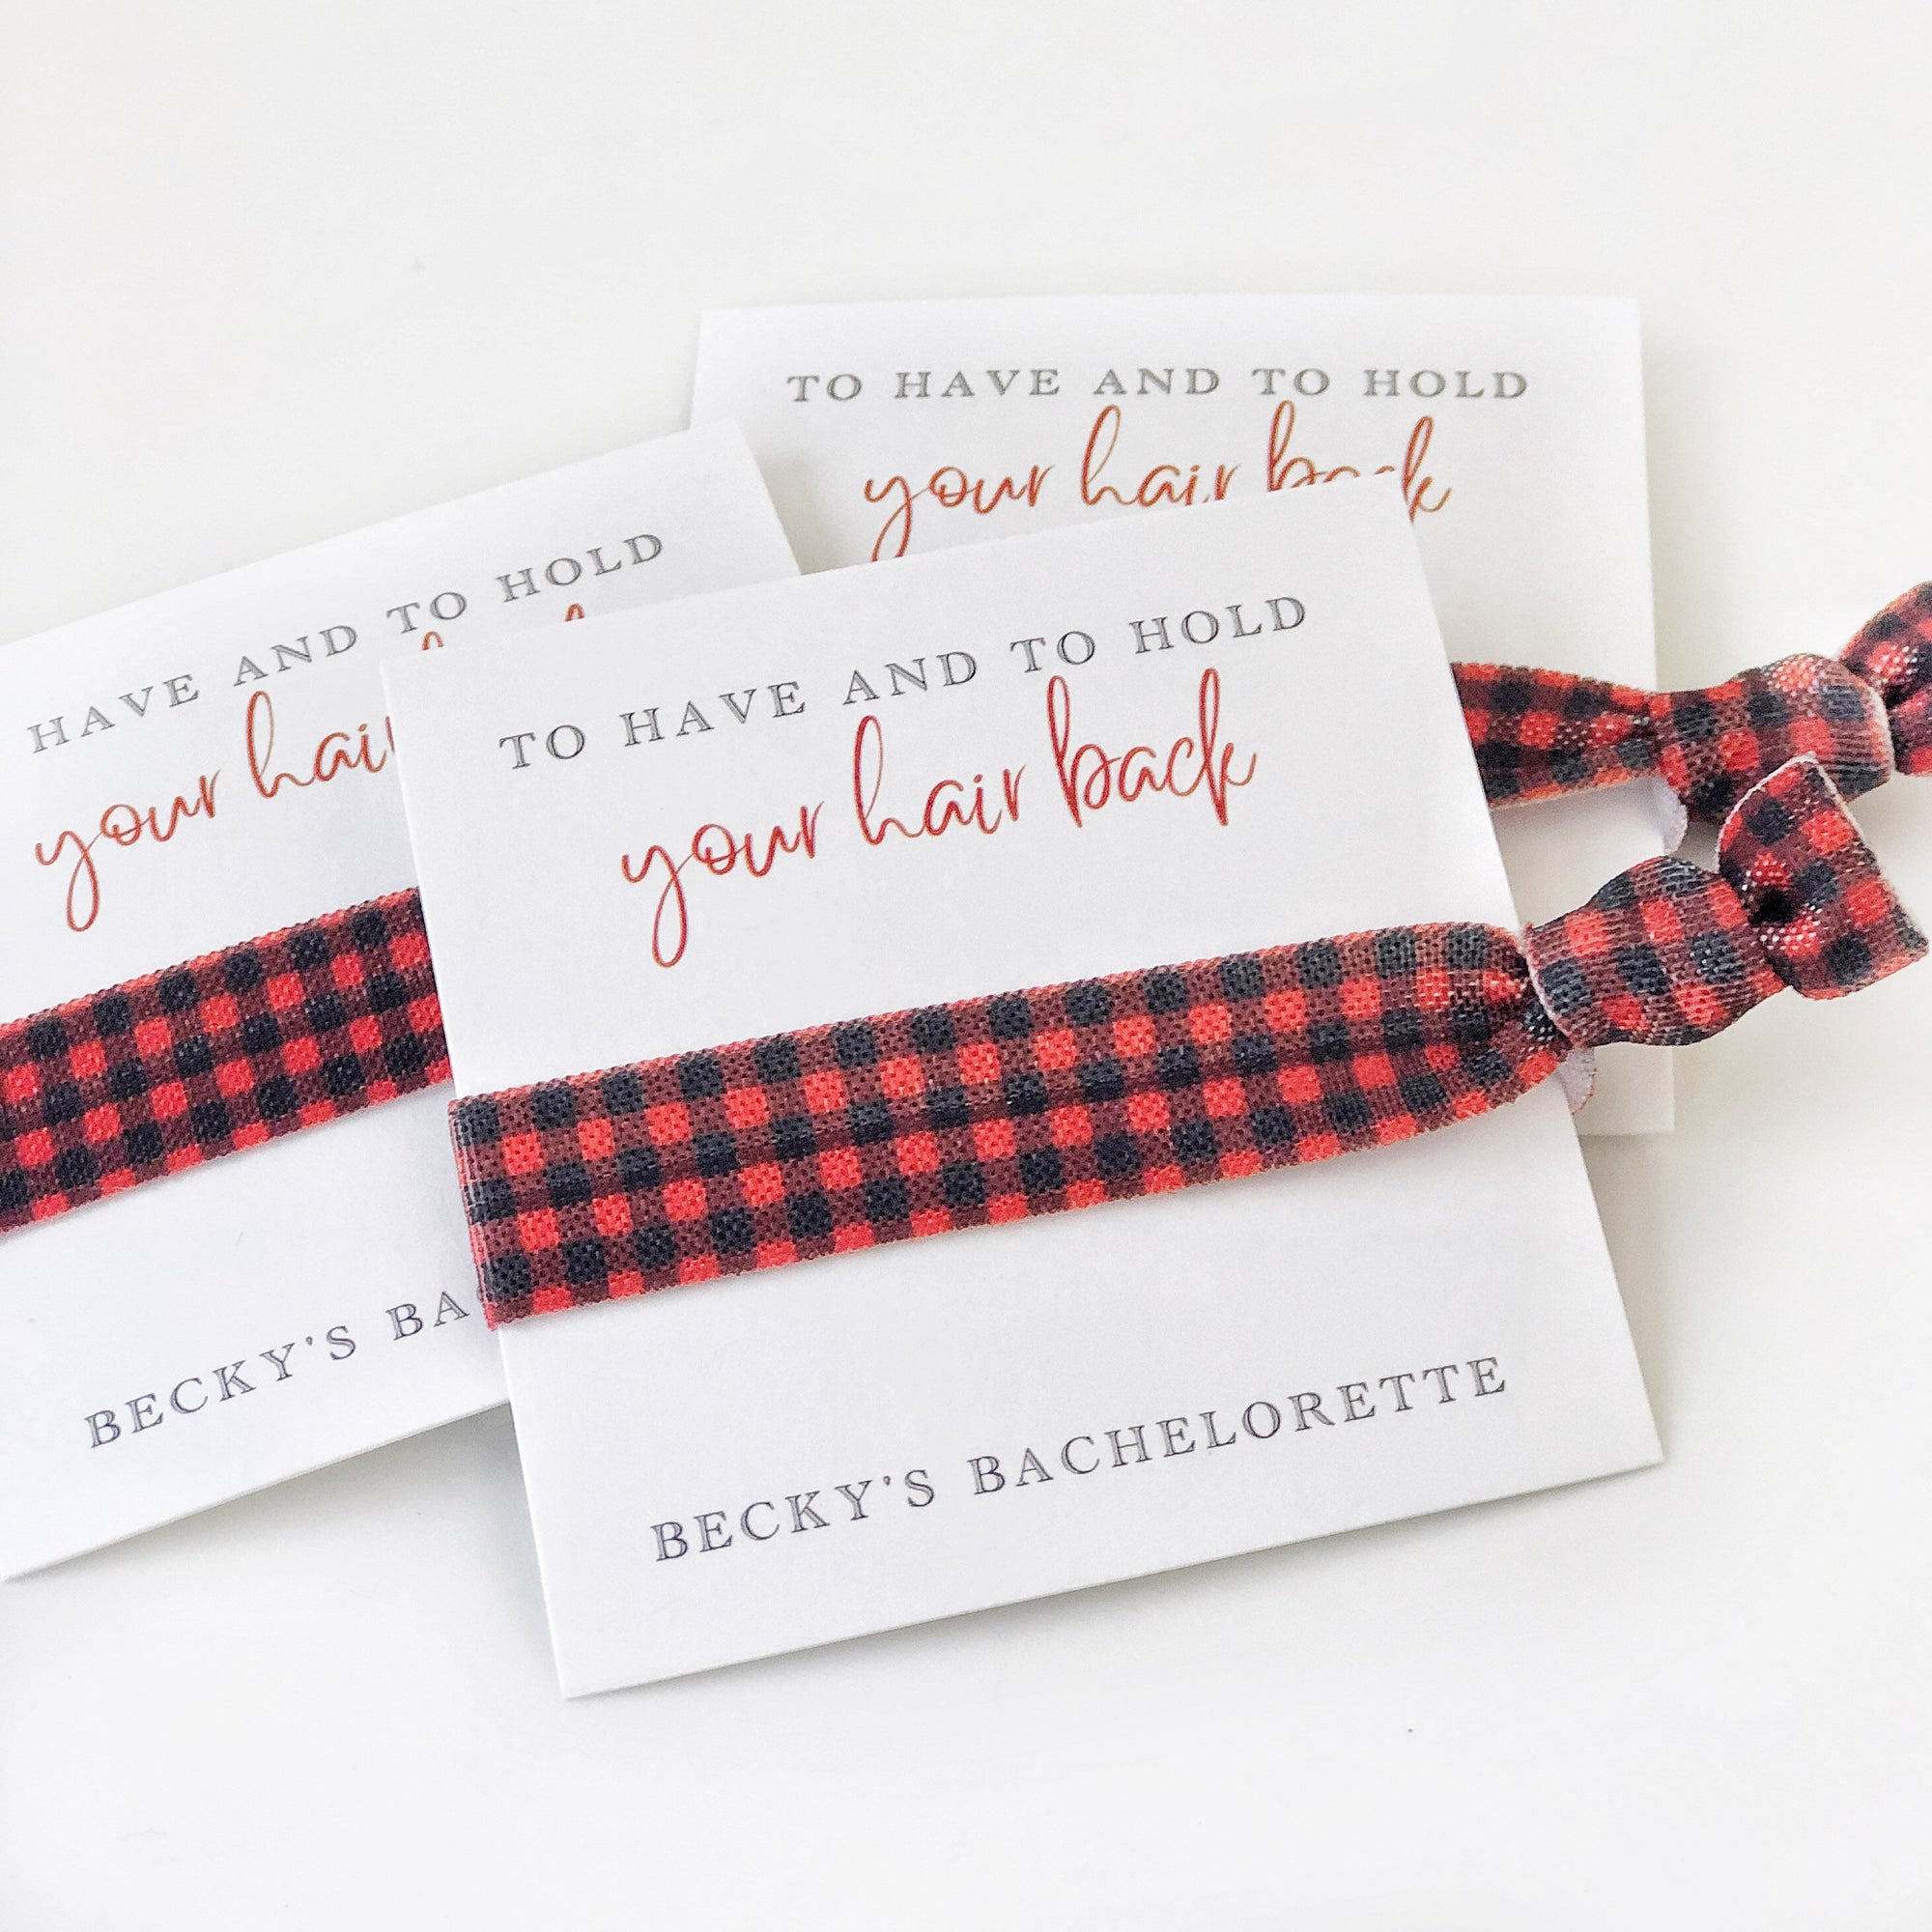 To Have and To Hold Your Hair Back, Buffalo Plaid Hair Tie Bachelorette Favor, Bachelorette Party Decor, Flannel Fling Before The Ring BP100 - @PlumPolkaDot 